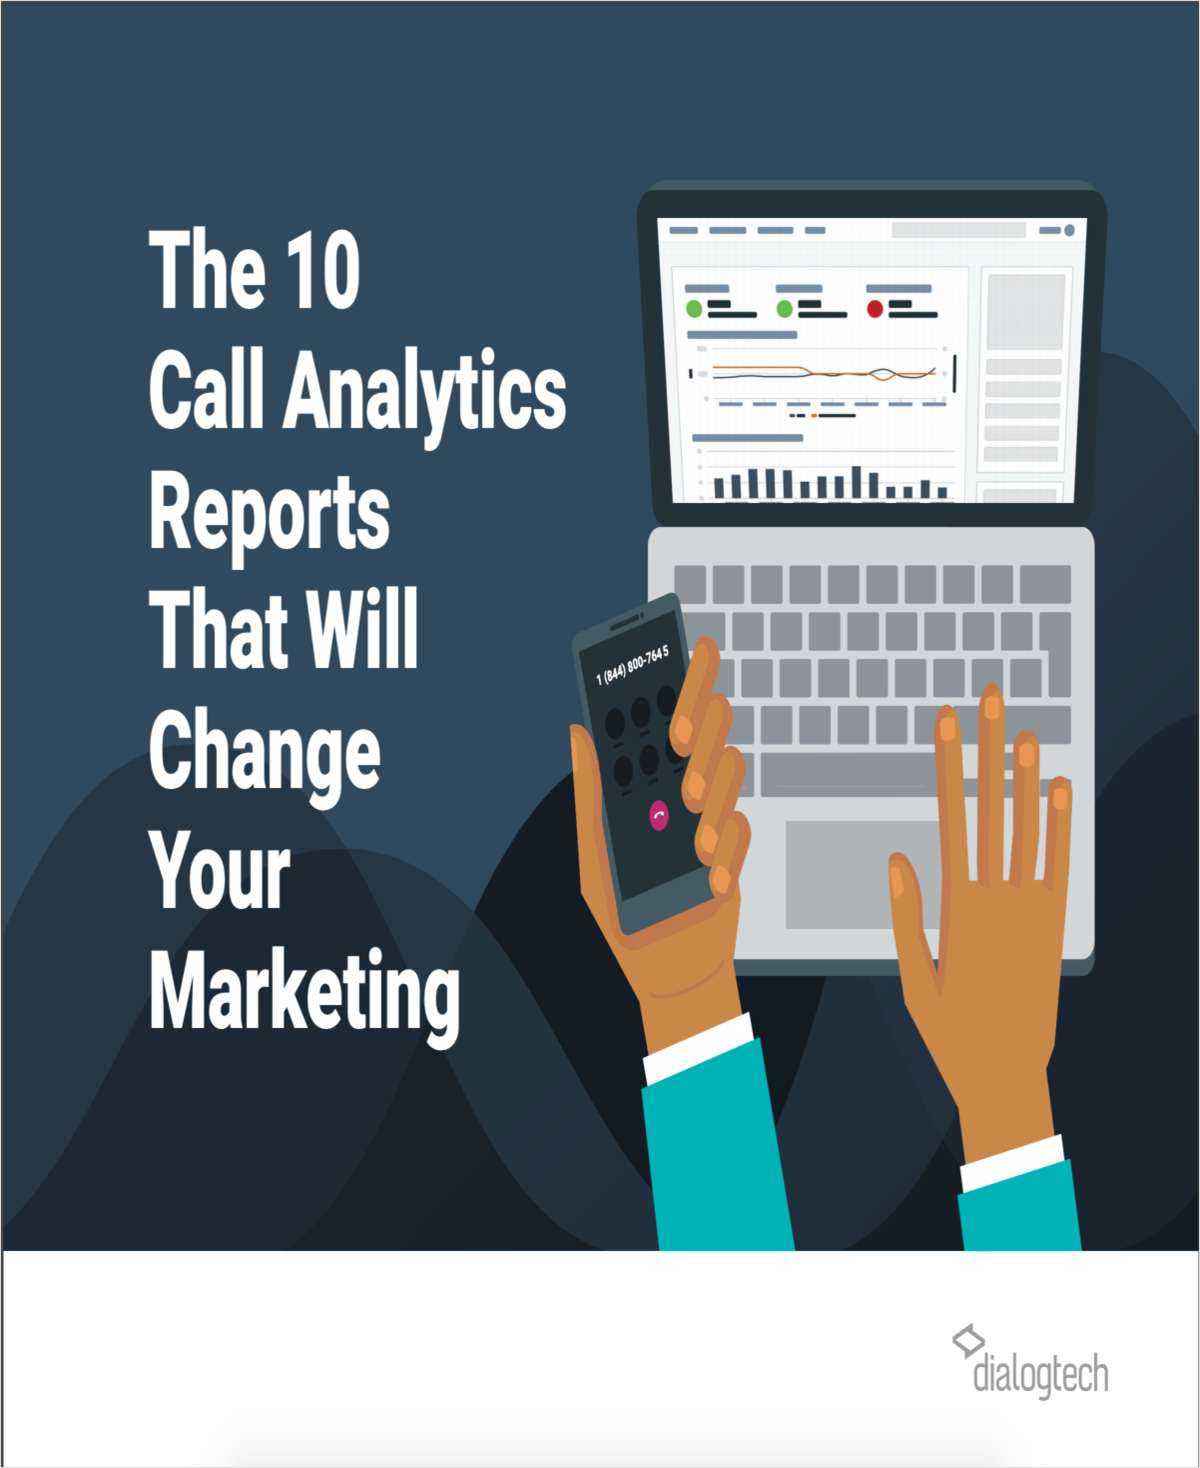 The 10 Call Analytics Reports That Will Change Your Marketing